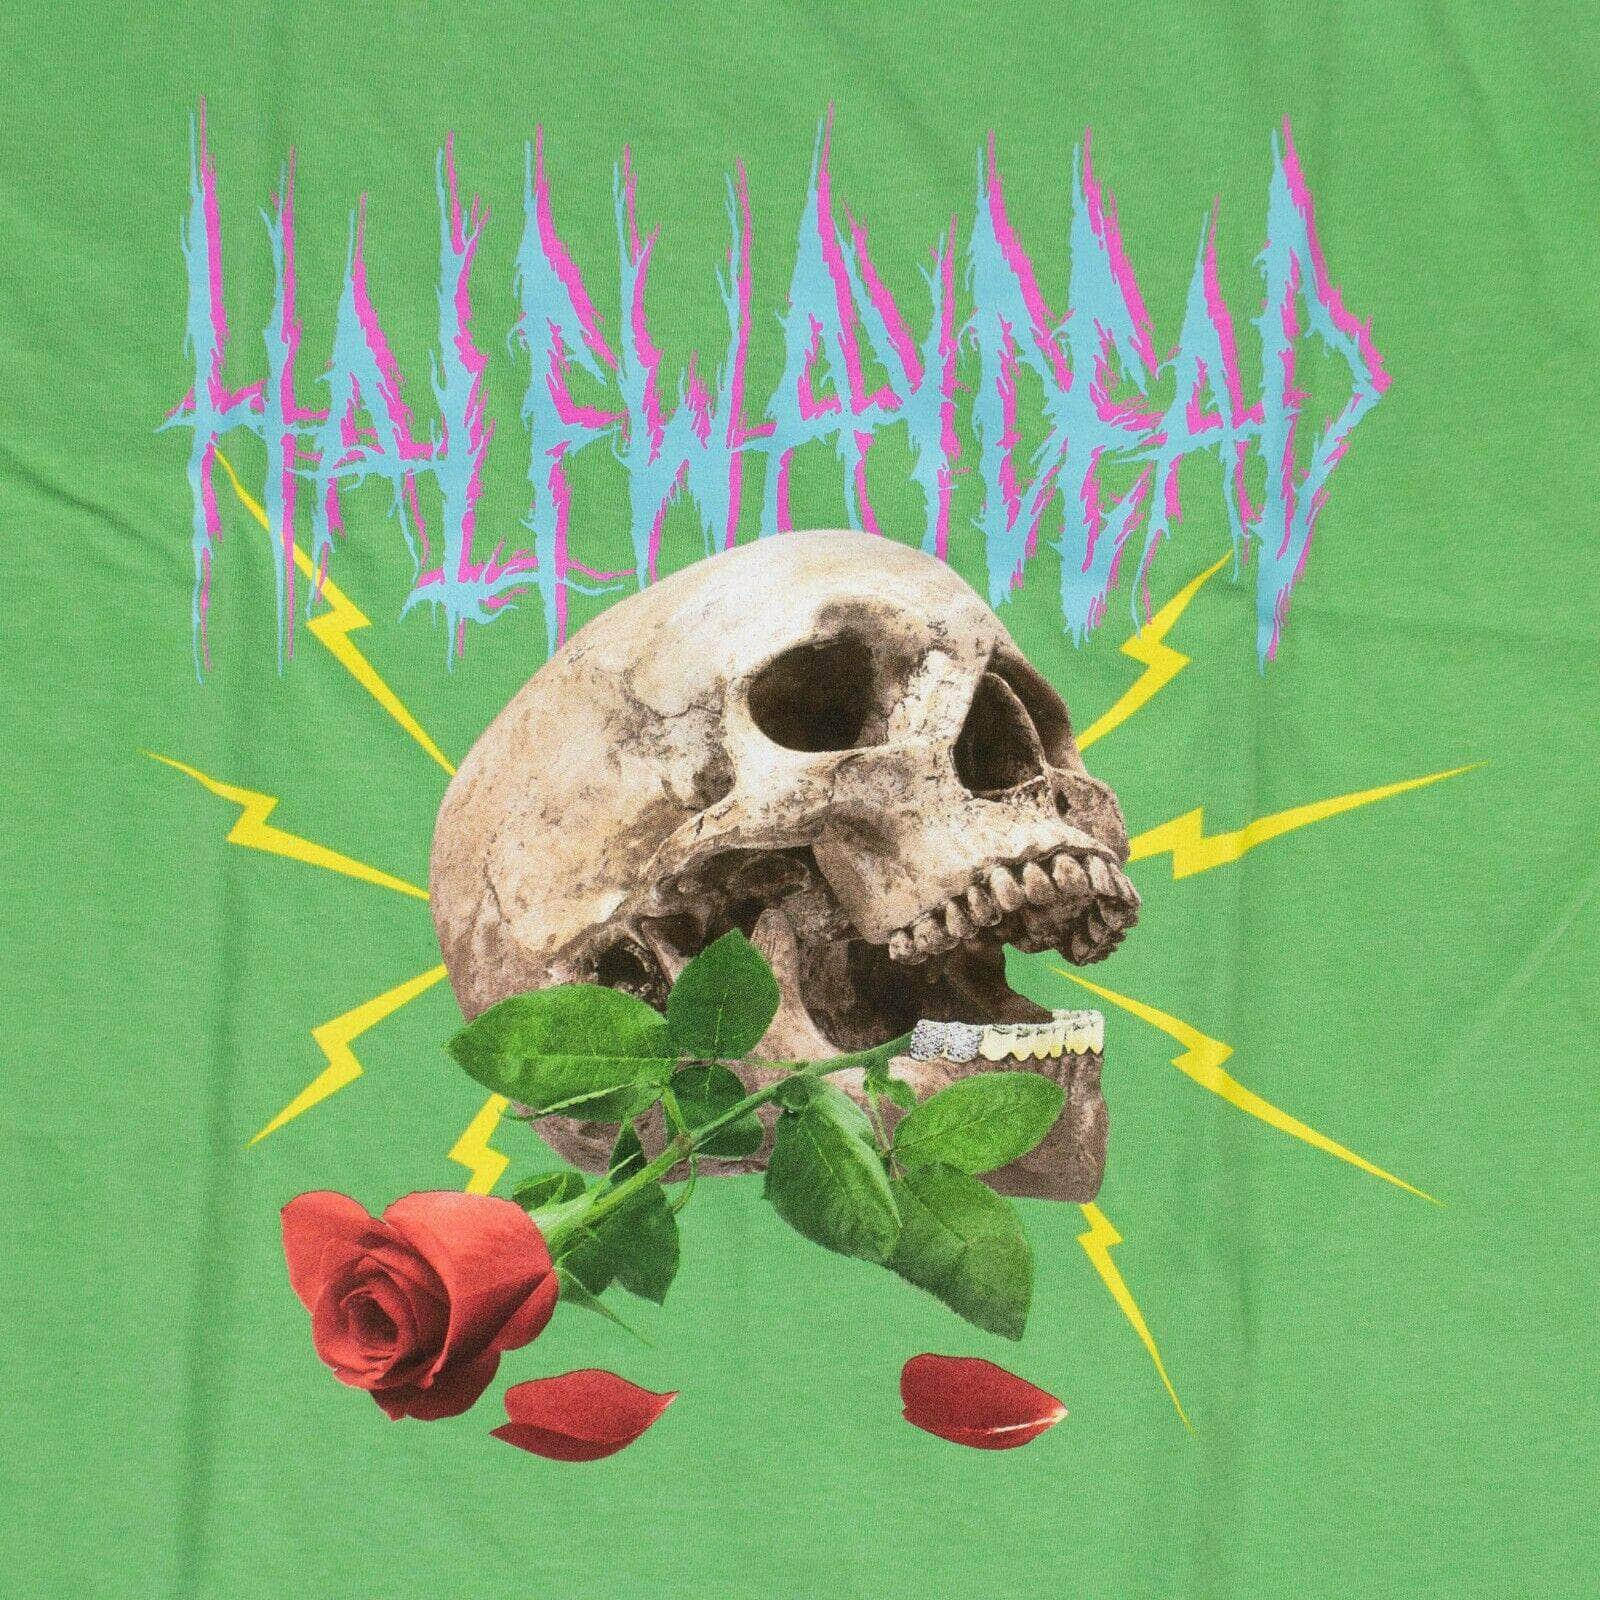 Halfway Dead channelenable-all, chicmi, couponcollection, gender-mens, halfway-dead, main-clothing, mens-shoes, size-xl, SPO, under-250 XL / B19HMPZ034 Green "Lightning Skull" Logo Short Sleeve T-shirt 80ST-HD-1002/XL 80ST-HD-1002/XL